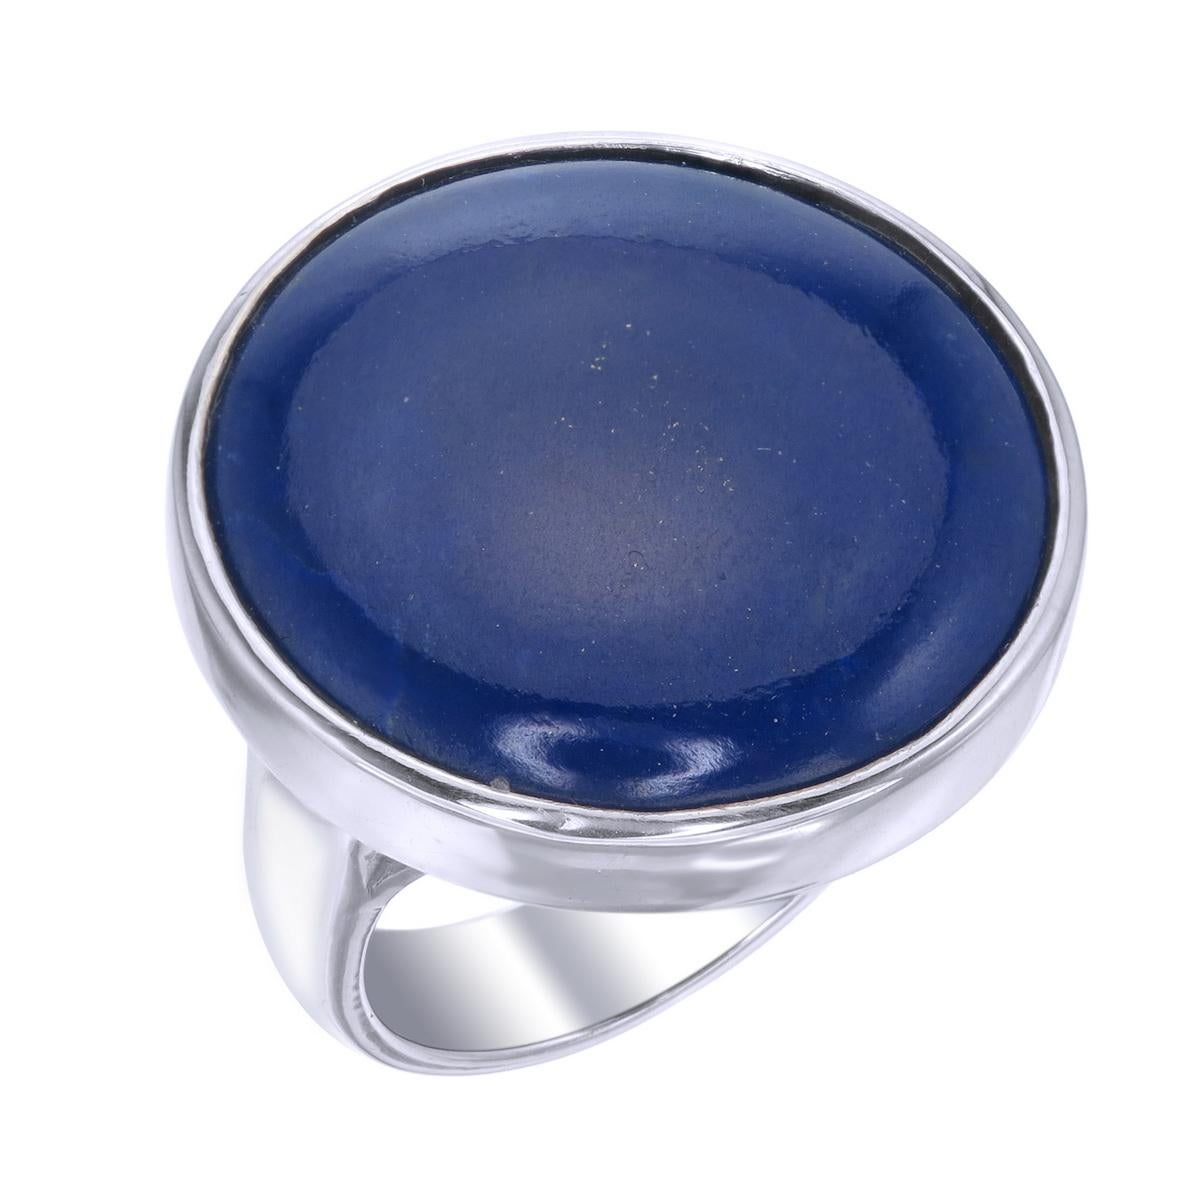 Orloff of Denmark; 19.05 carat Lapis Lazuli Sculpture ring fashioned out of 925 Sterling Silver.

From our latest collection based solely on the beautiful Lapis Lazuli.
This piece features a round cabochon cut lapis lazuli exhibiting a stunning deep